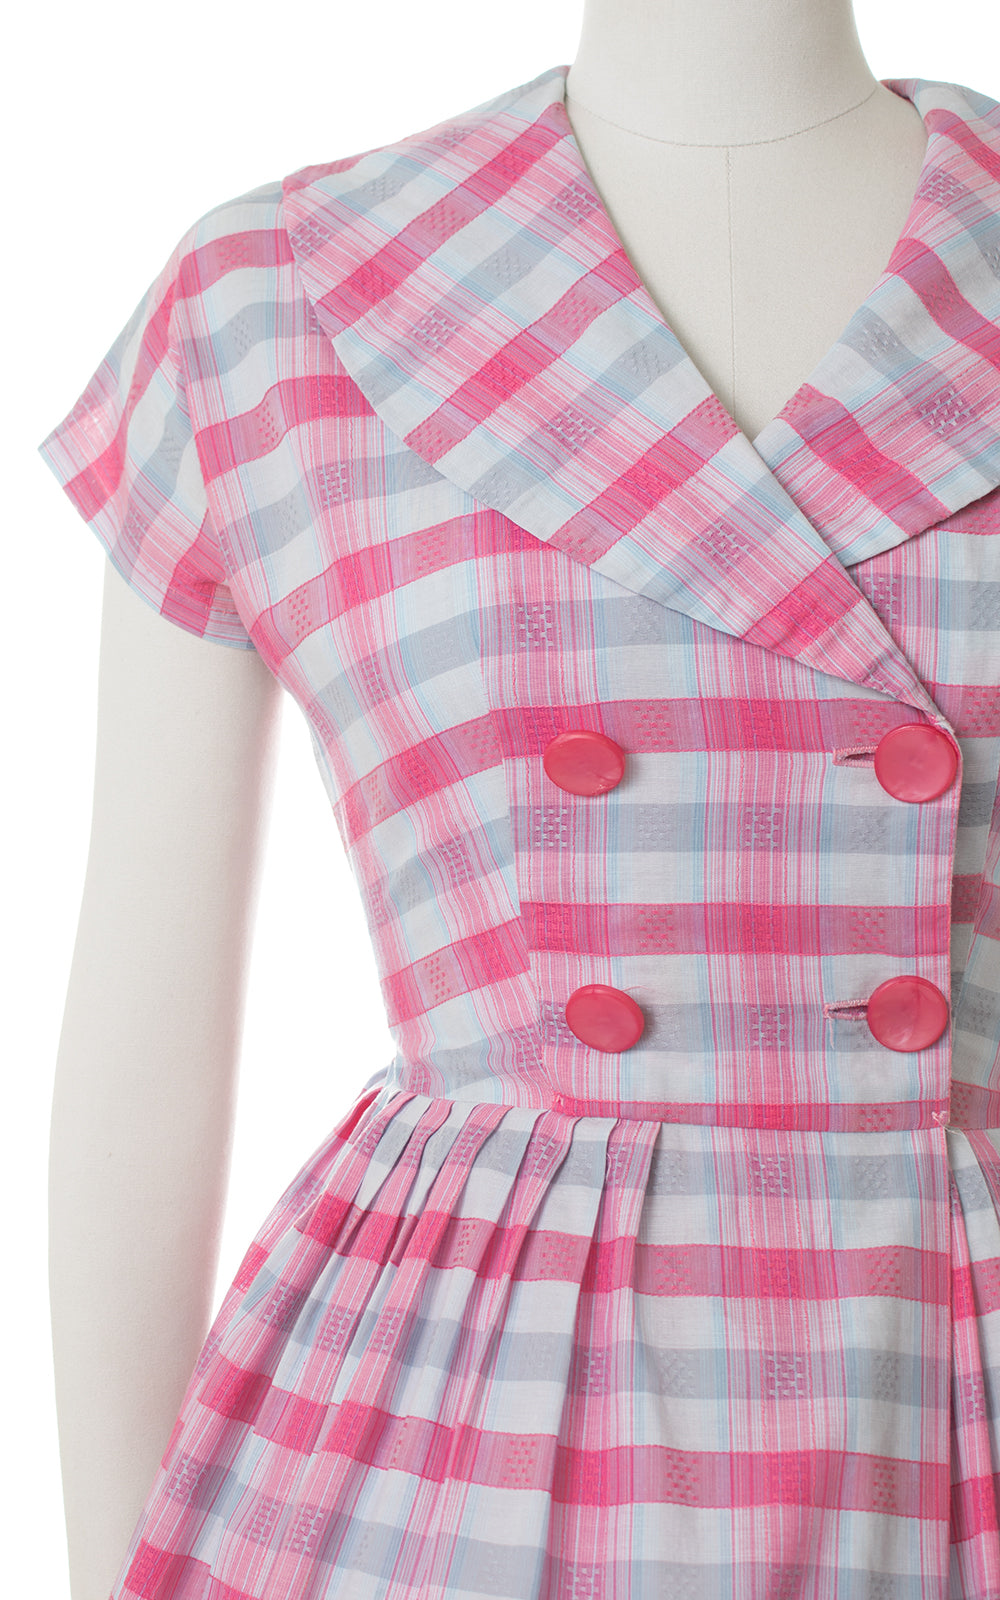 1950s Plaid Double Breasted Shirtwaist Dress